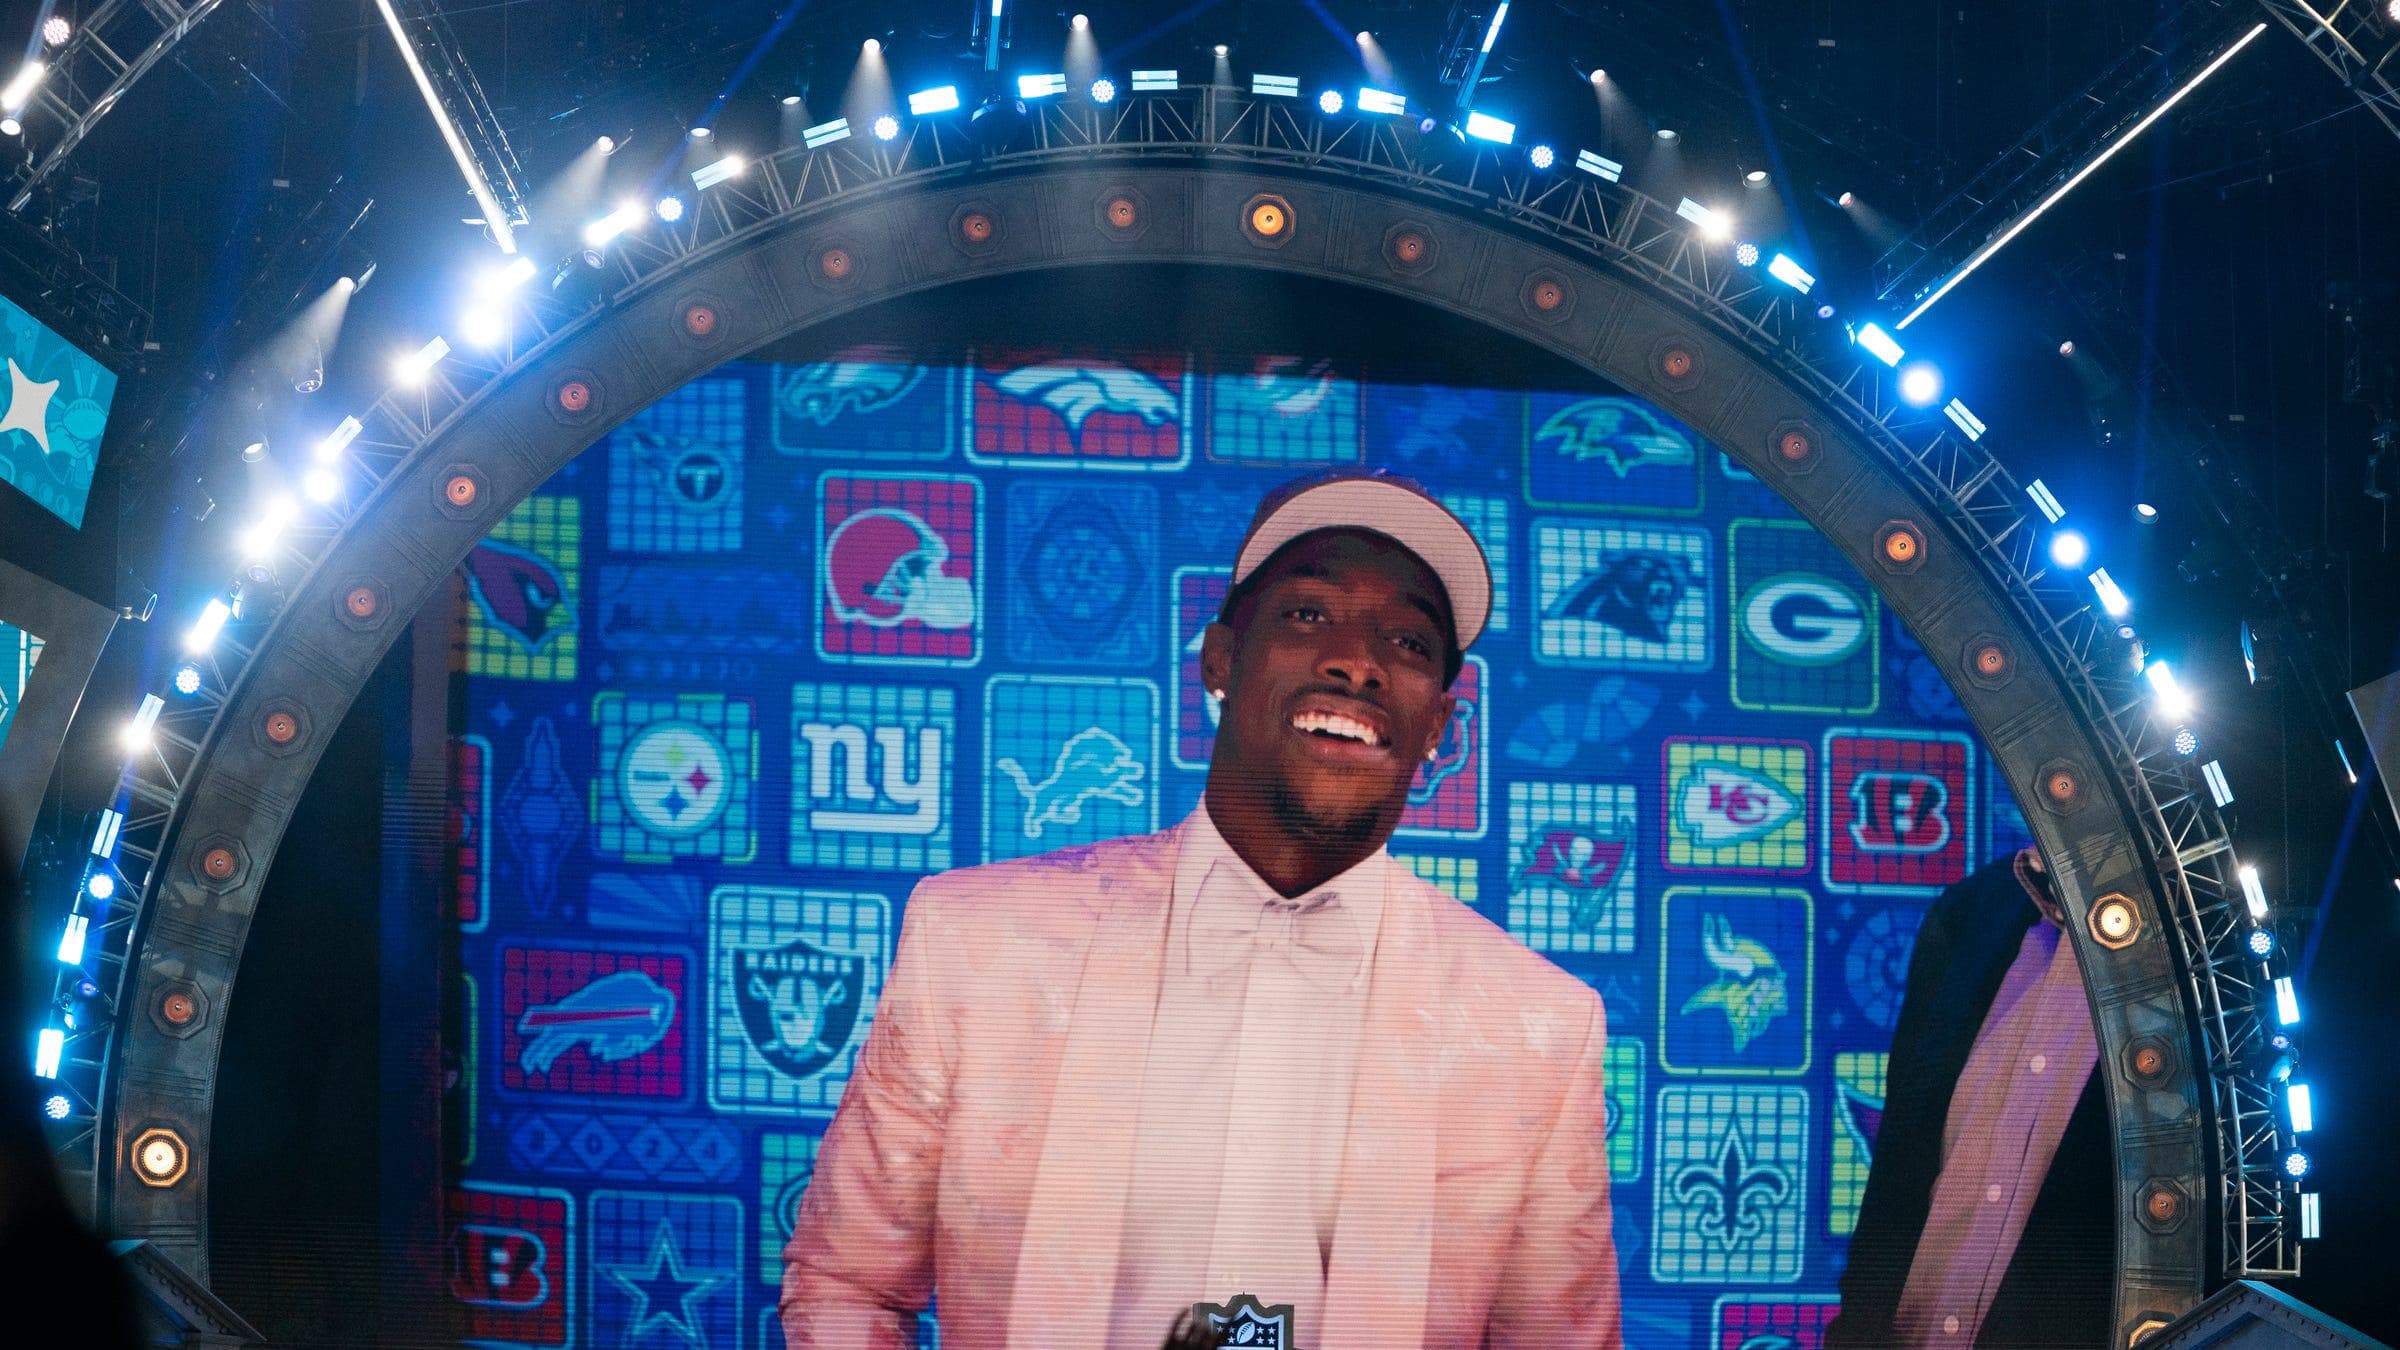 Terrion Arnold, from Alabama, was announced as the Lions 24th pick in the draft in the main theater.